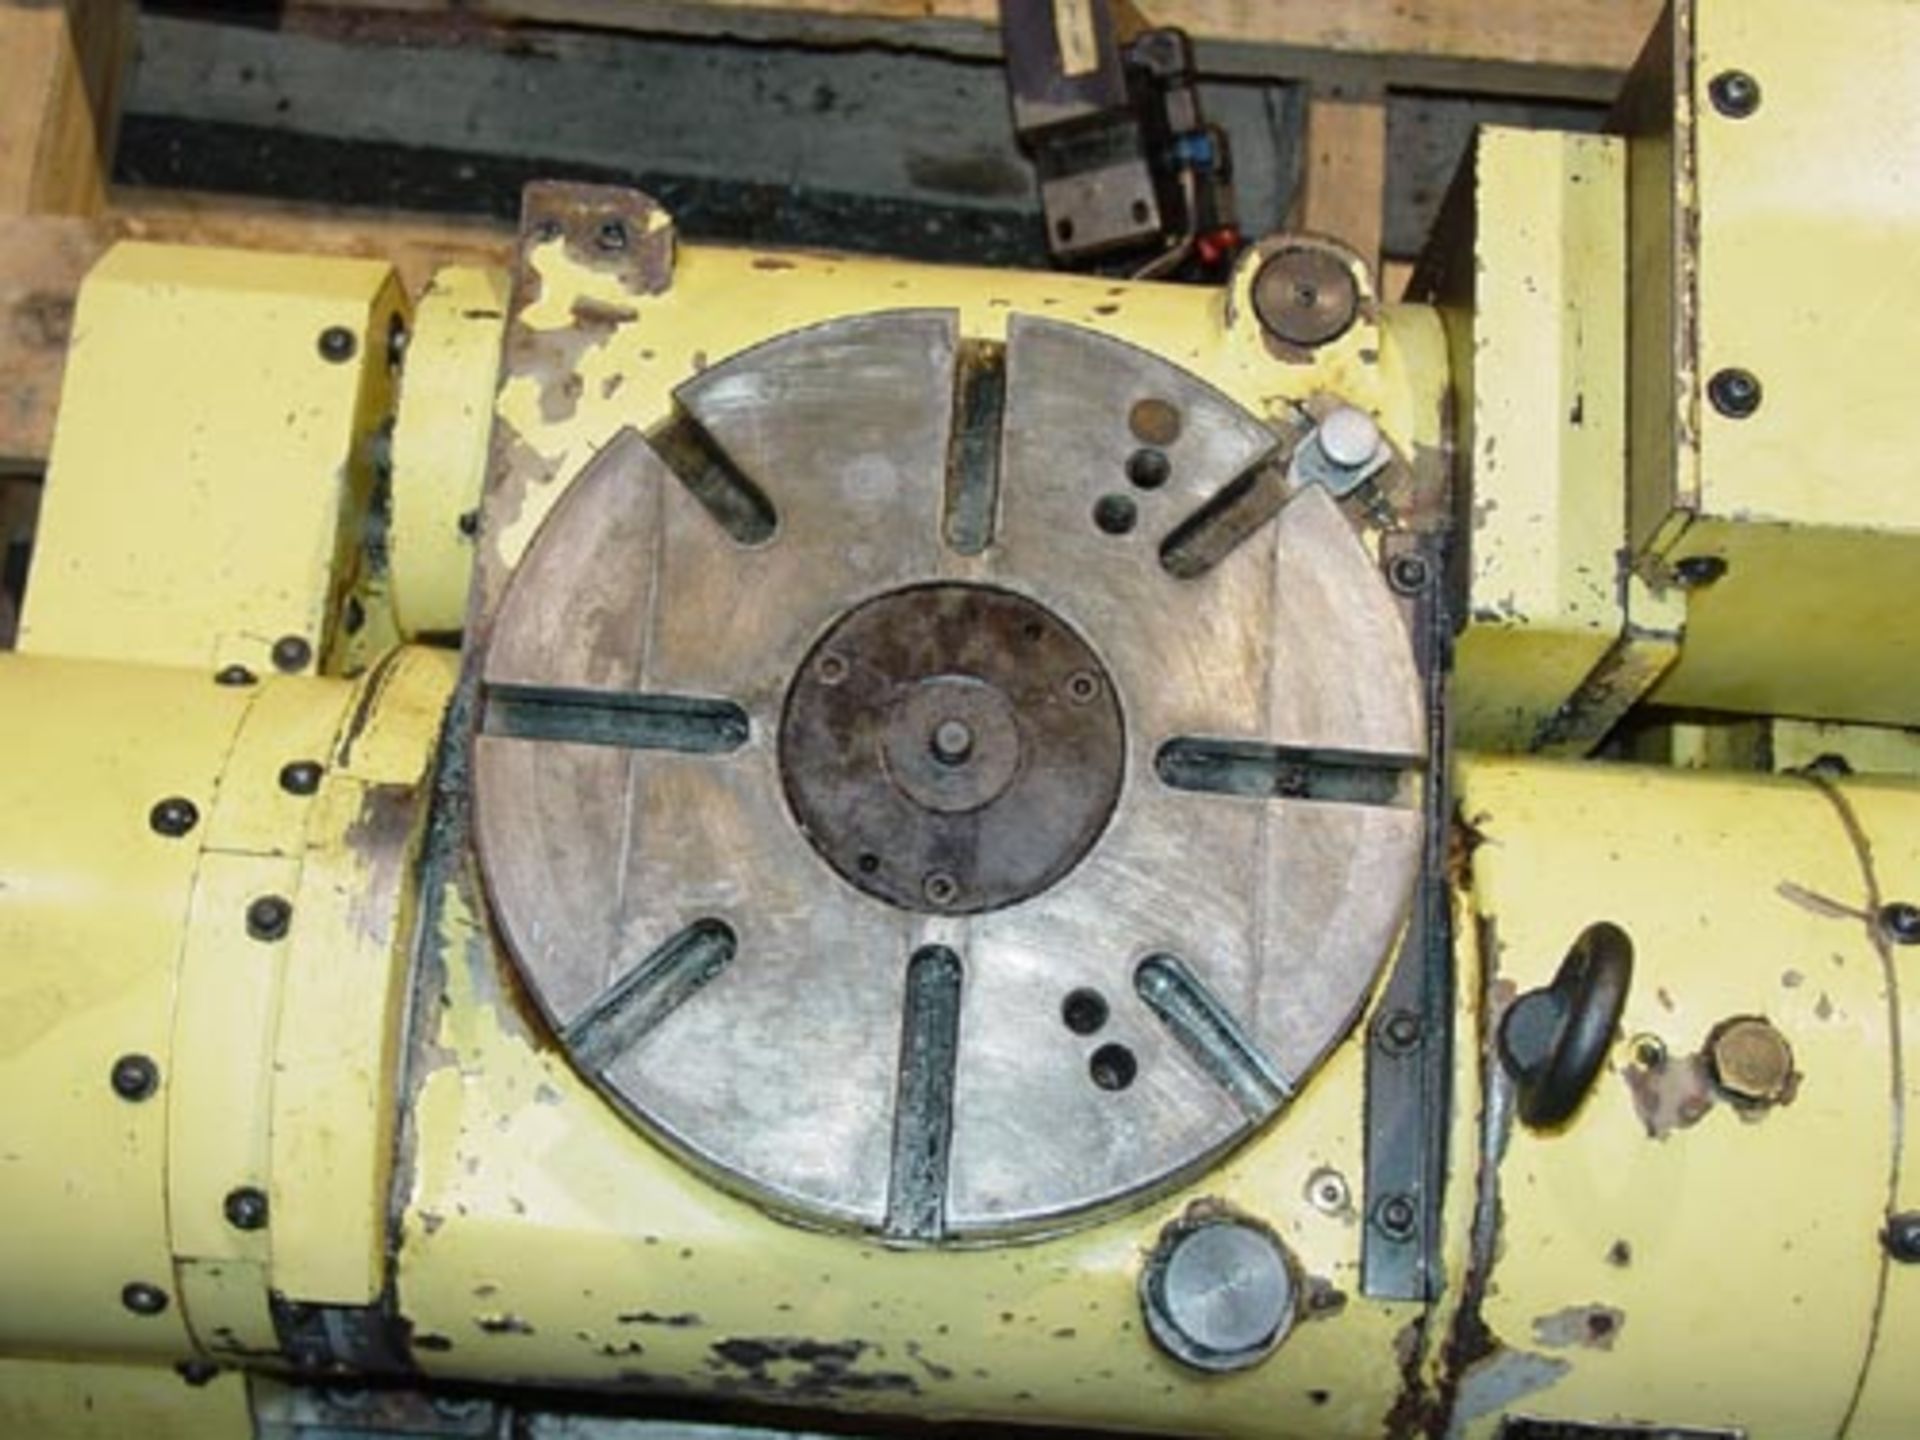 9" NIKKEN 4TH AND 5TH AXIS CNC ROTARY TABLE,  Model: 5AX-230, S/N 5022